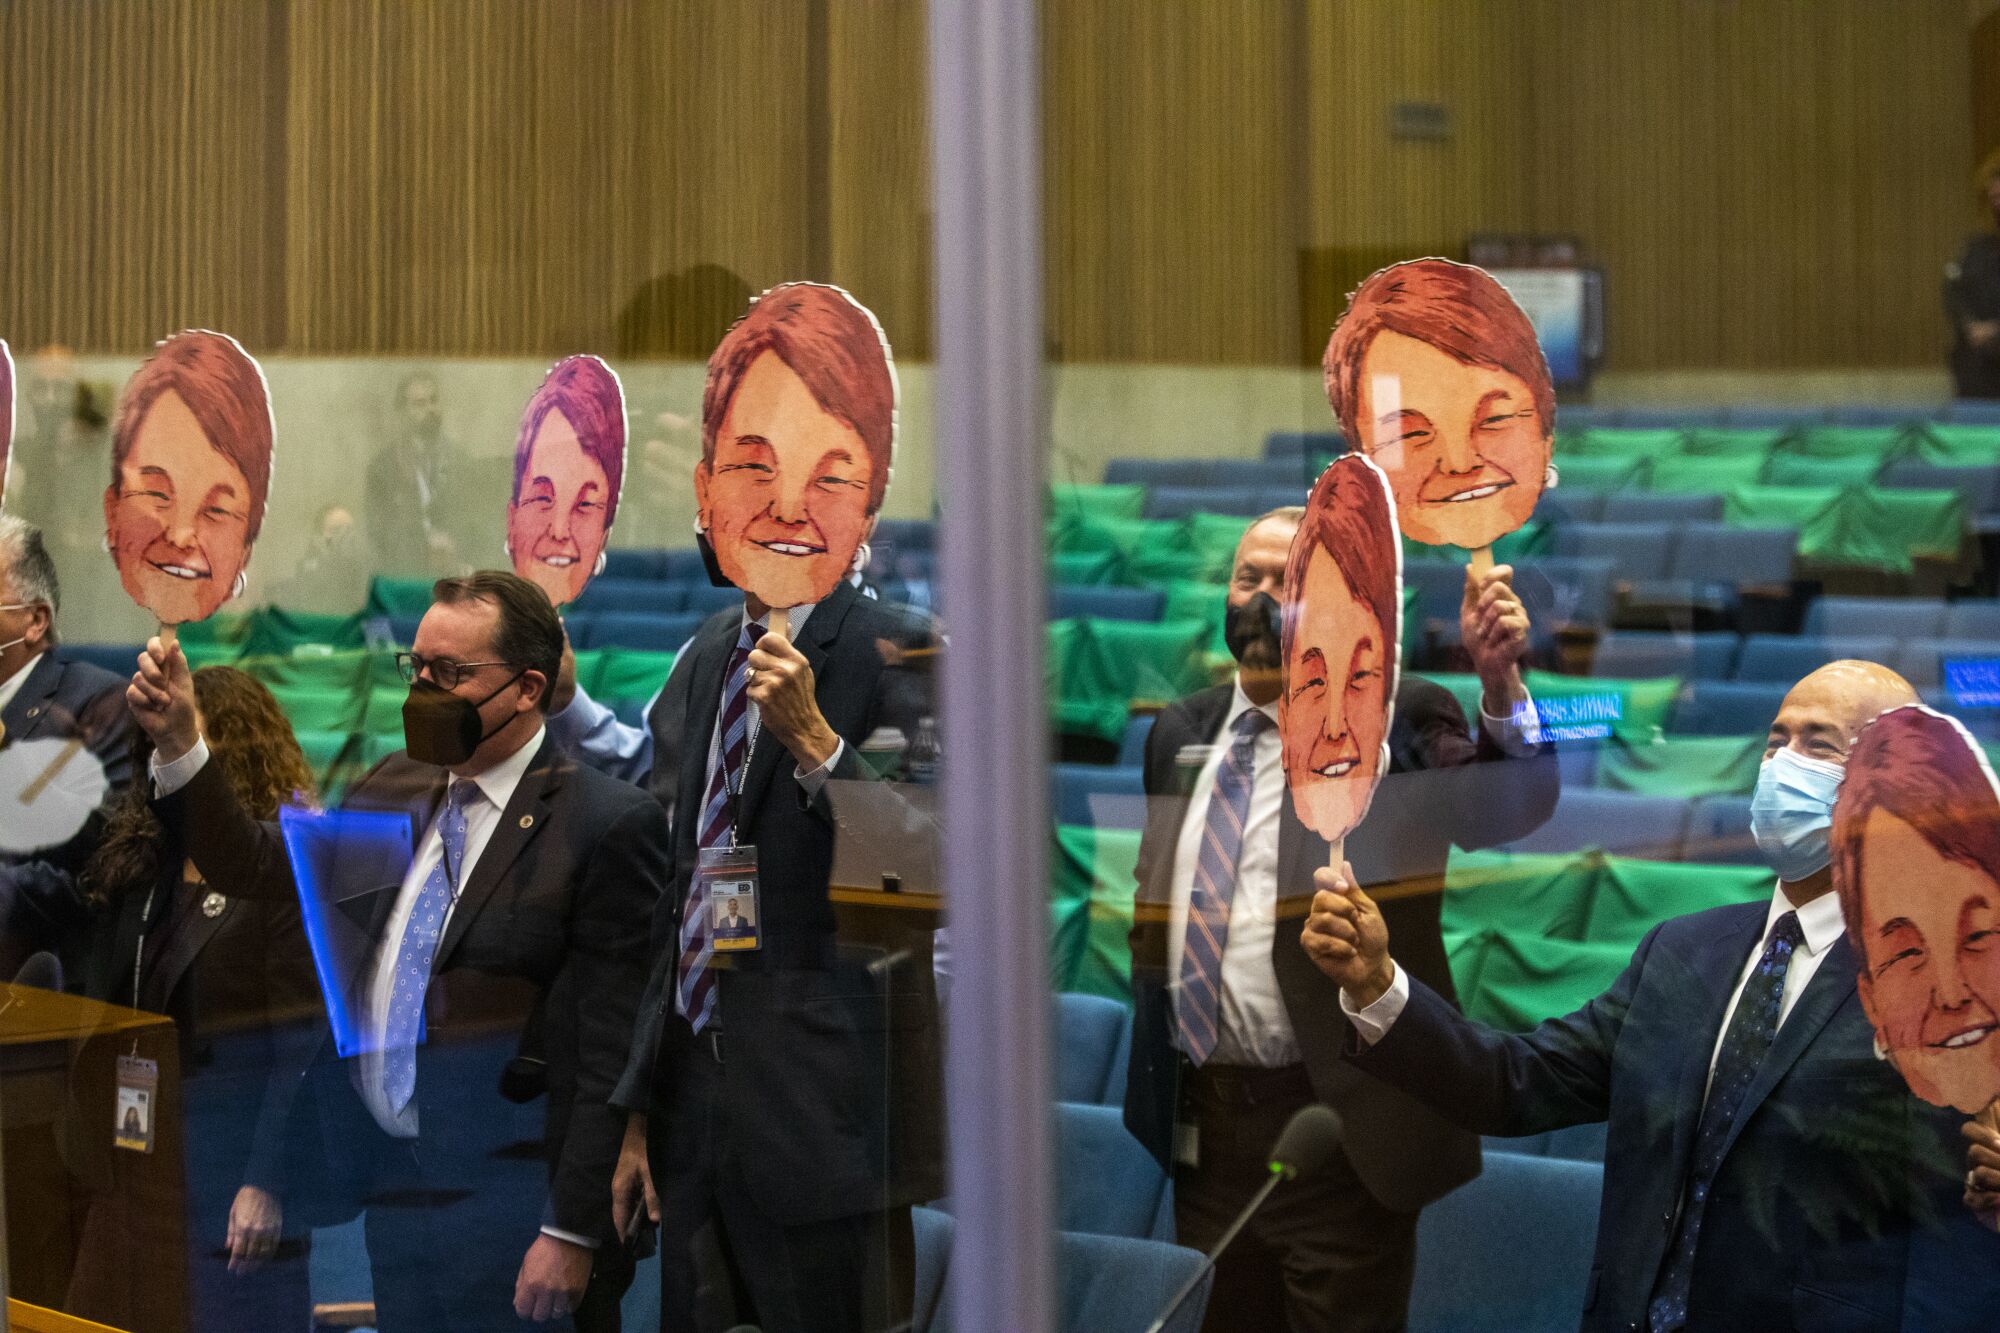 Staff hold up images of  Sheila Kuehl 